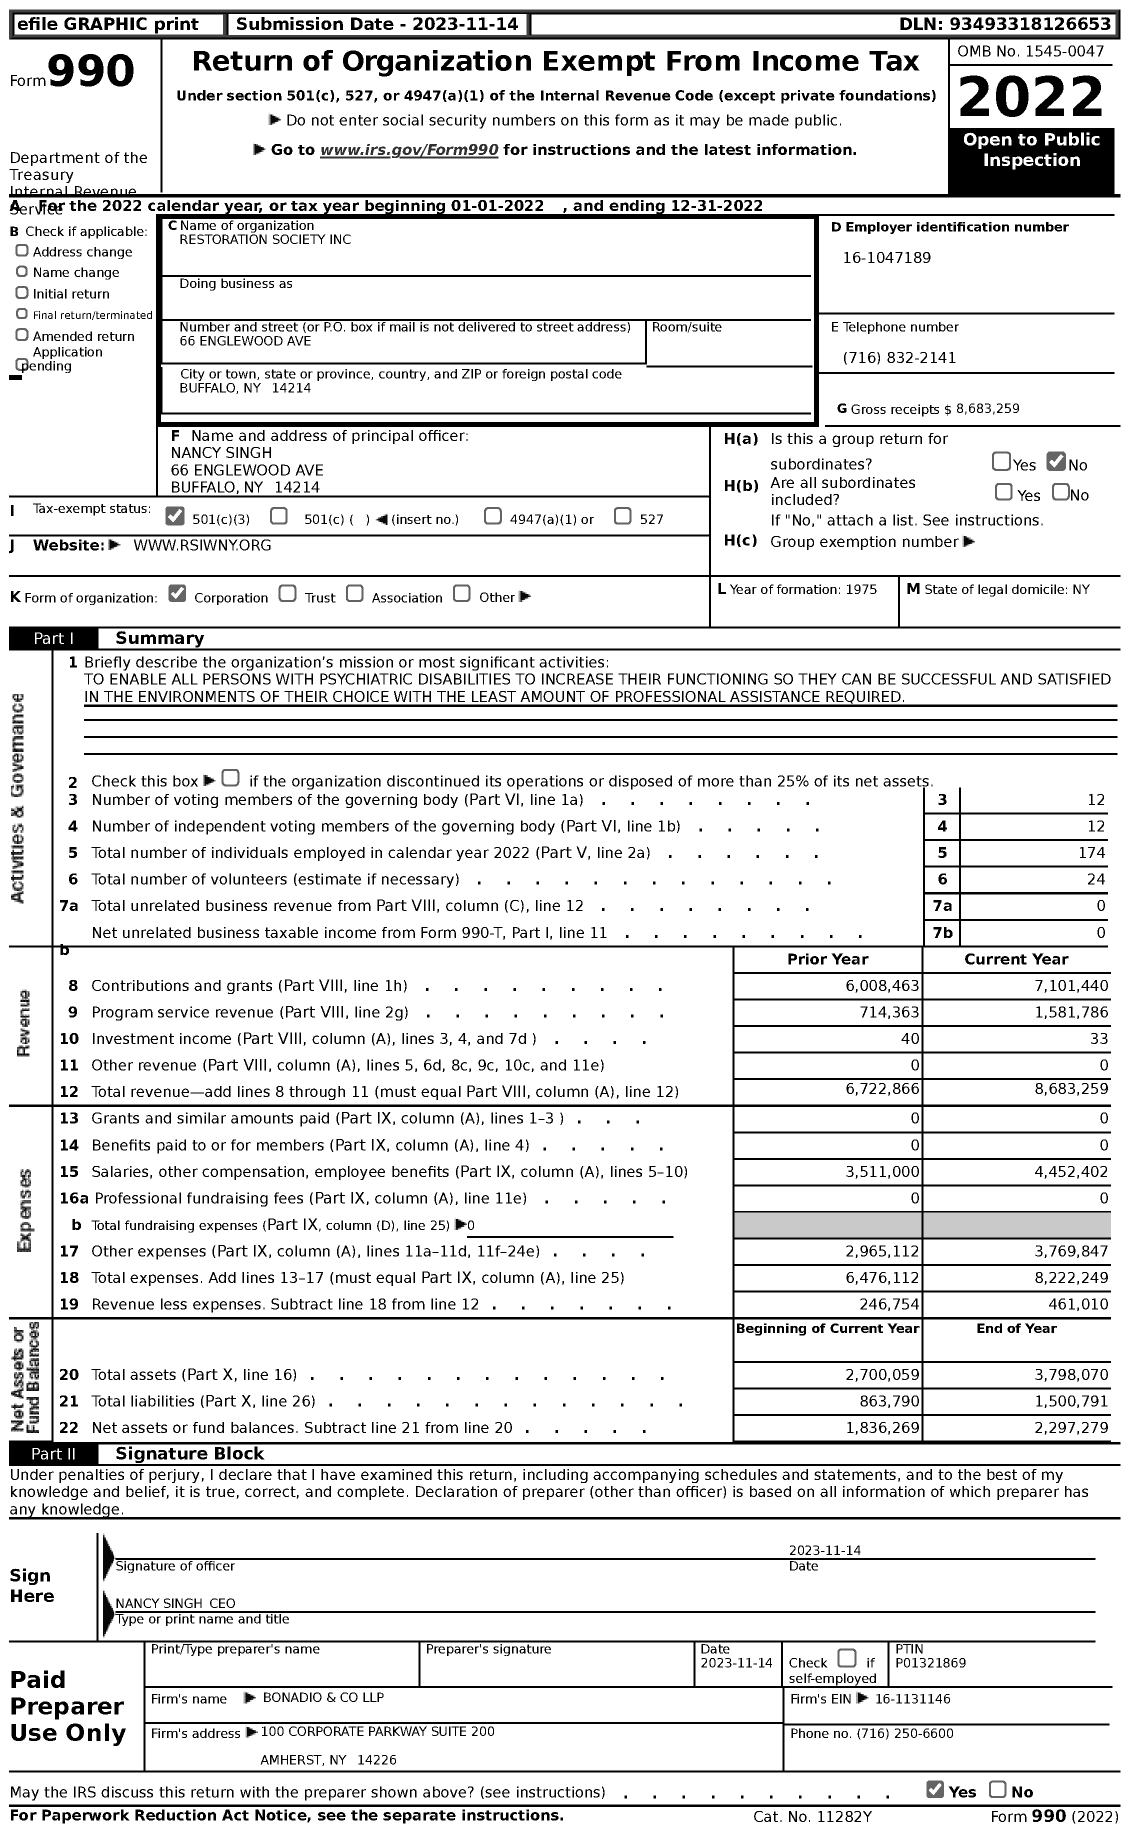 Image of first page of 2022 Form 990 for Restoration Society Incorporated (RSI)